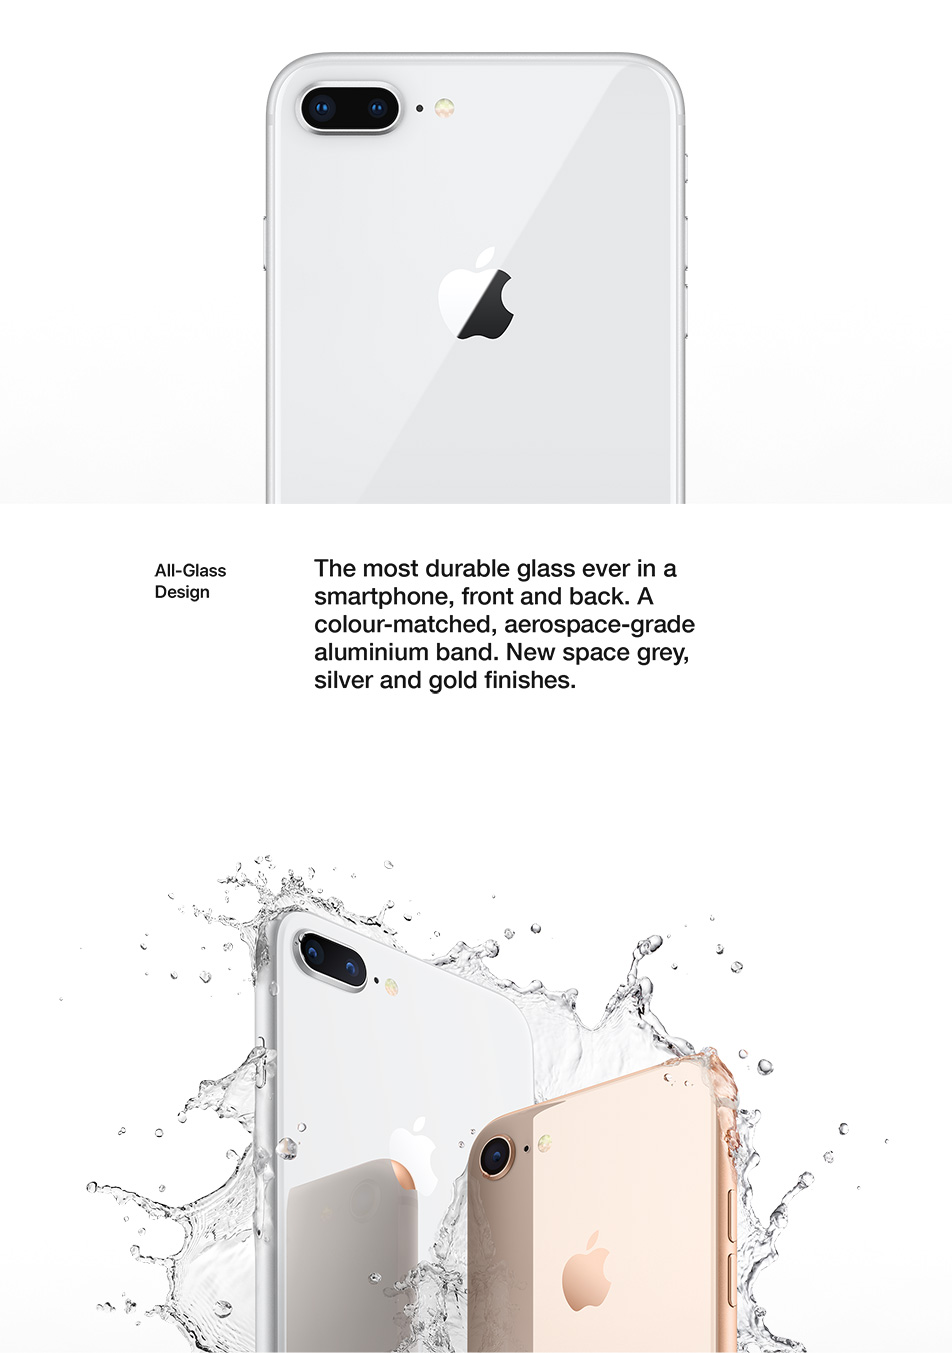 iPhone 8 - Design - All Glass Design - Water and Dust Resistant